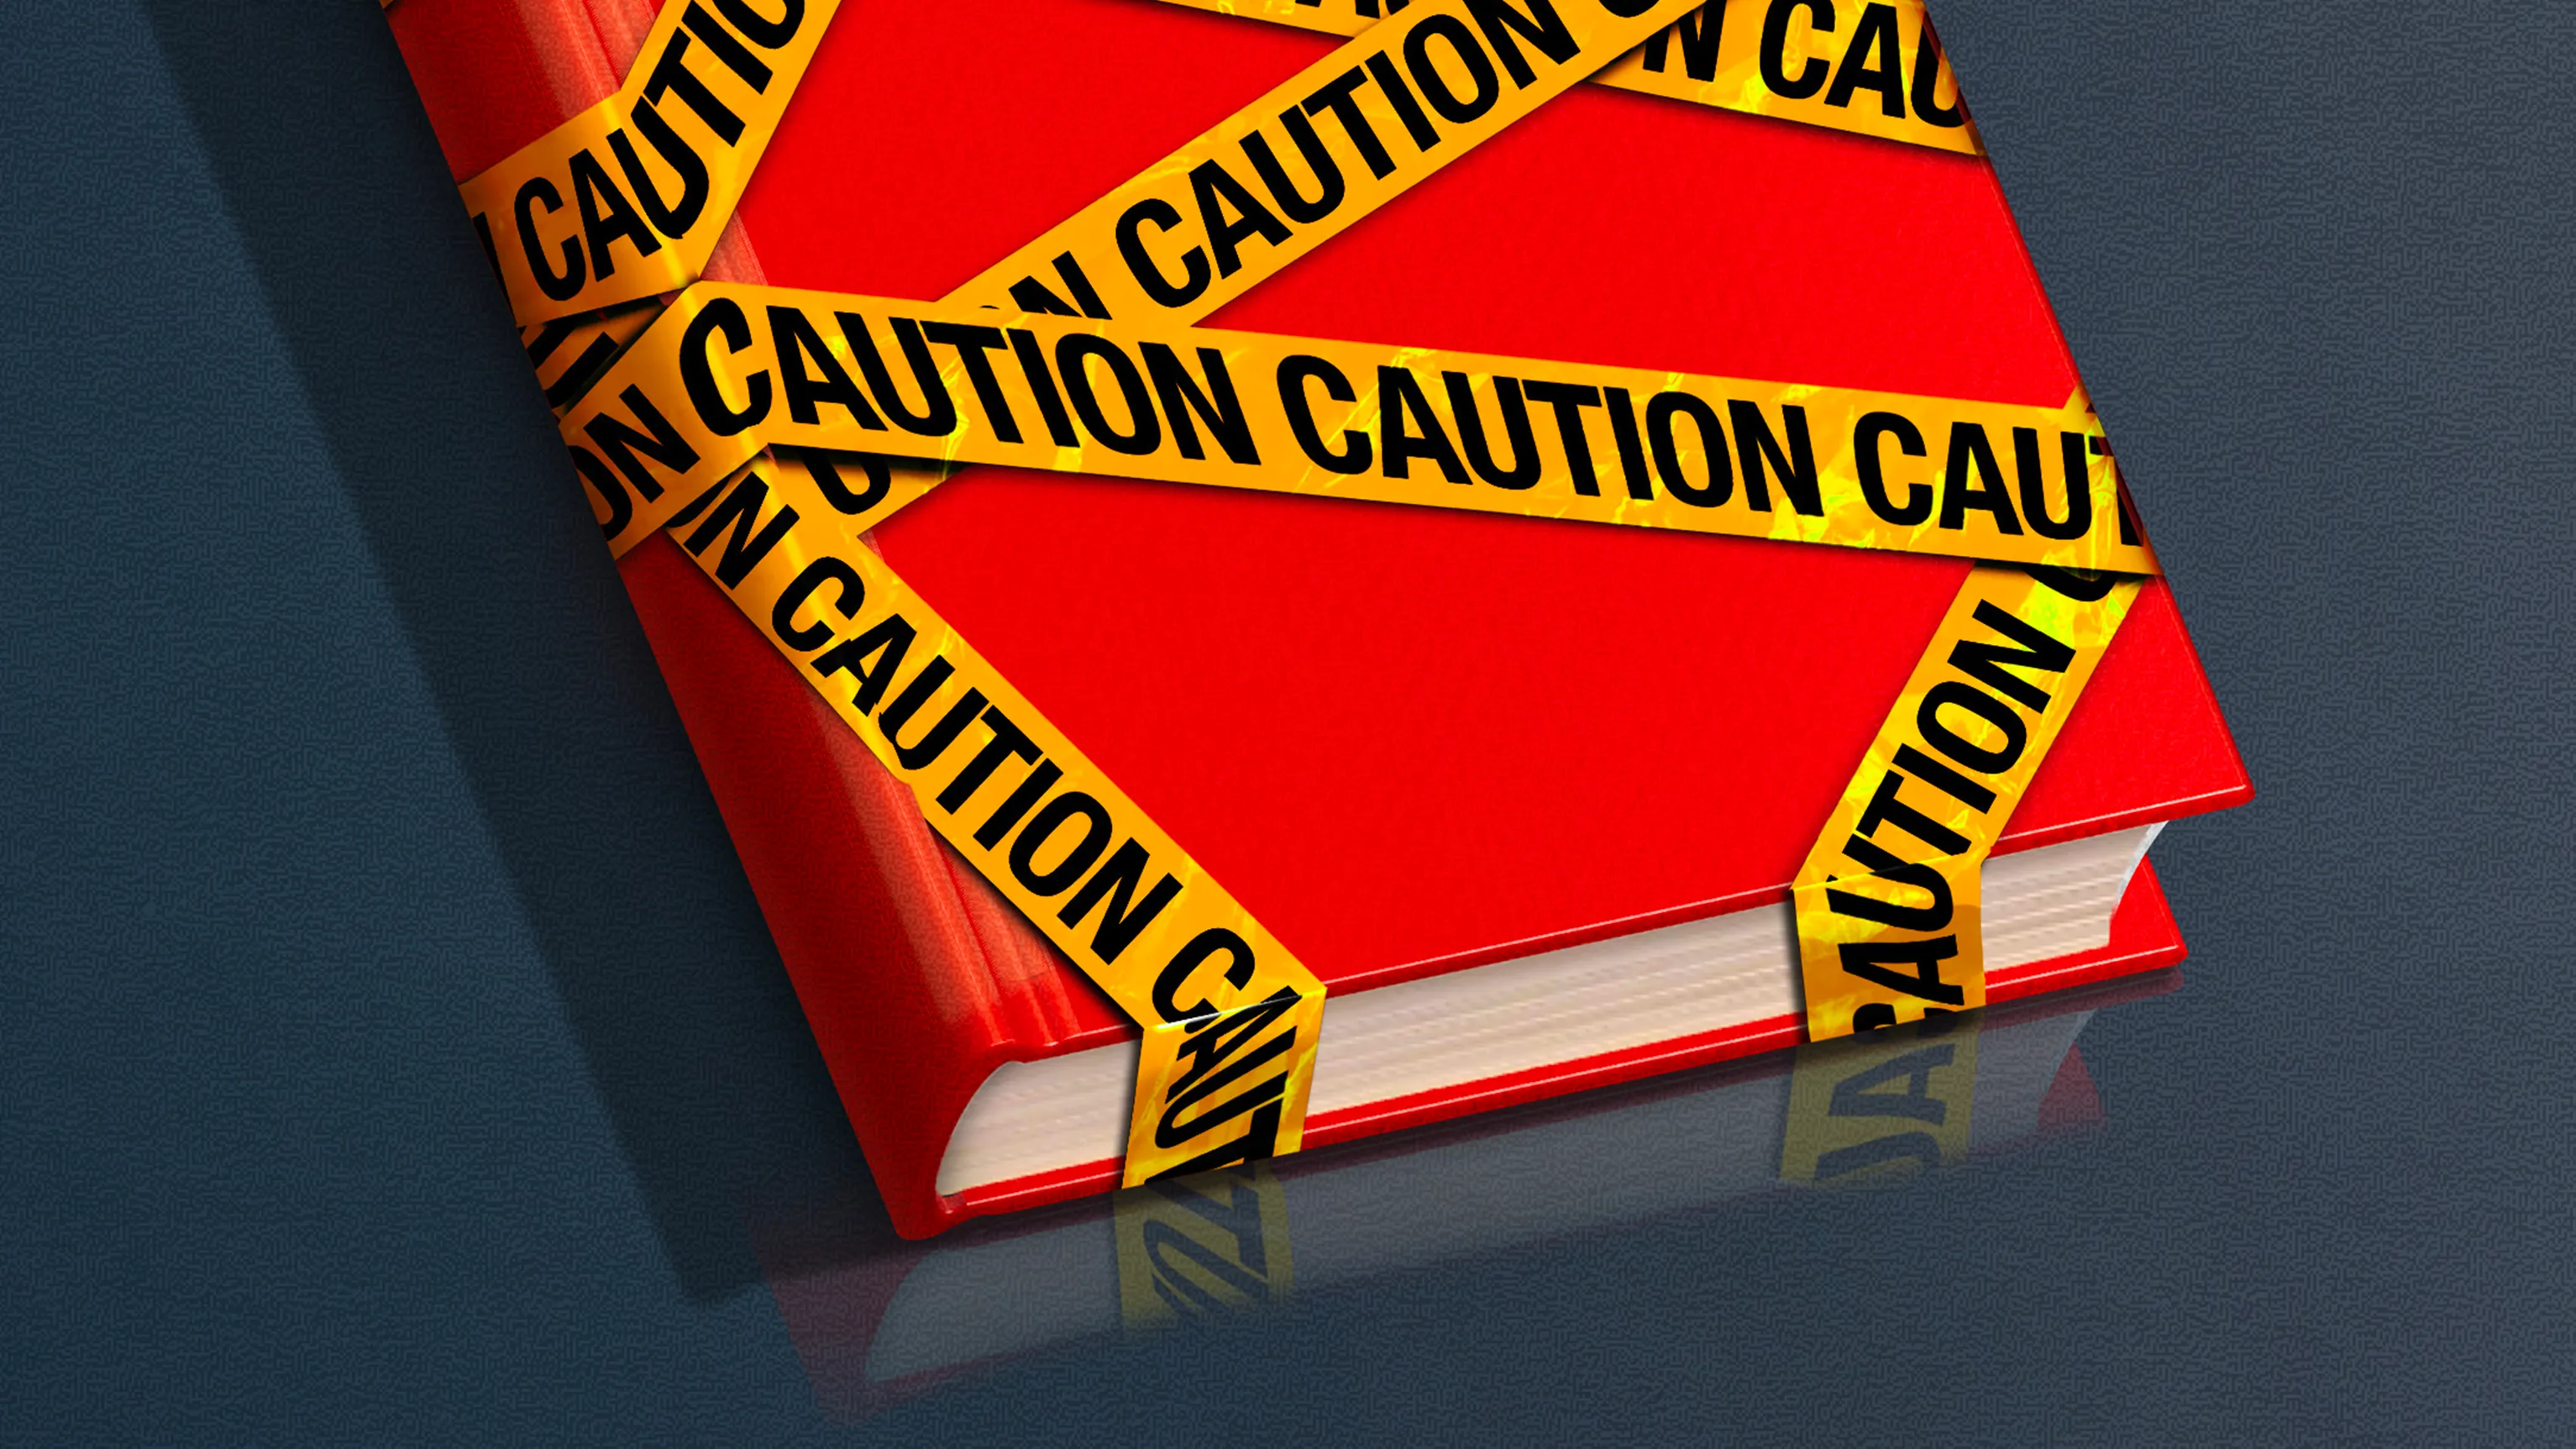 The use of trigger warnings in educational materials, media content, and training programs